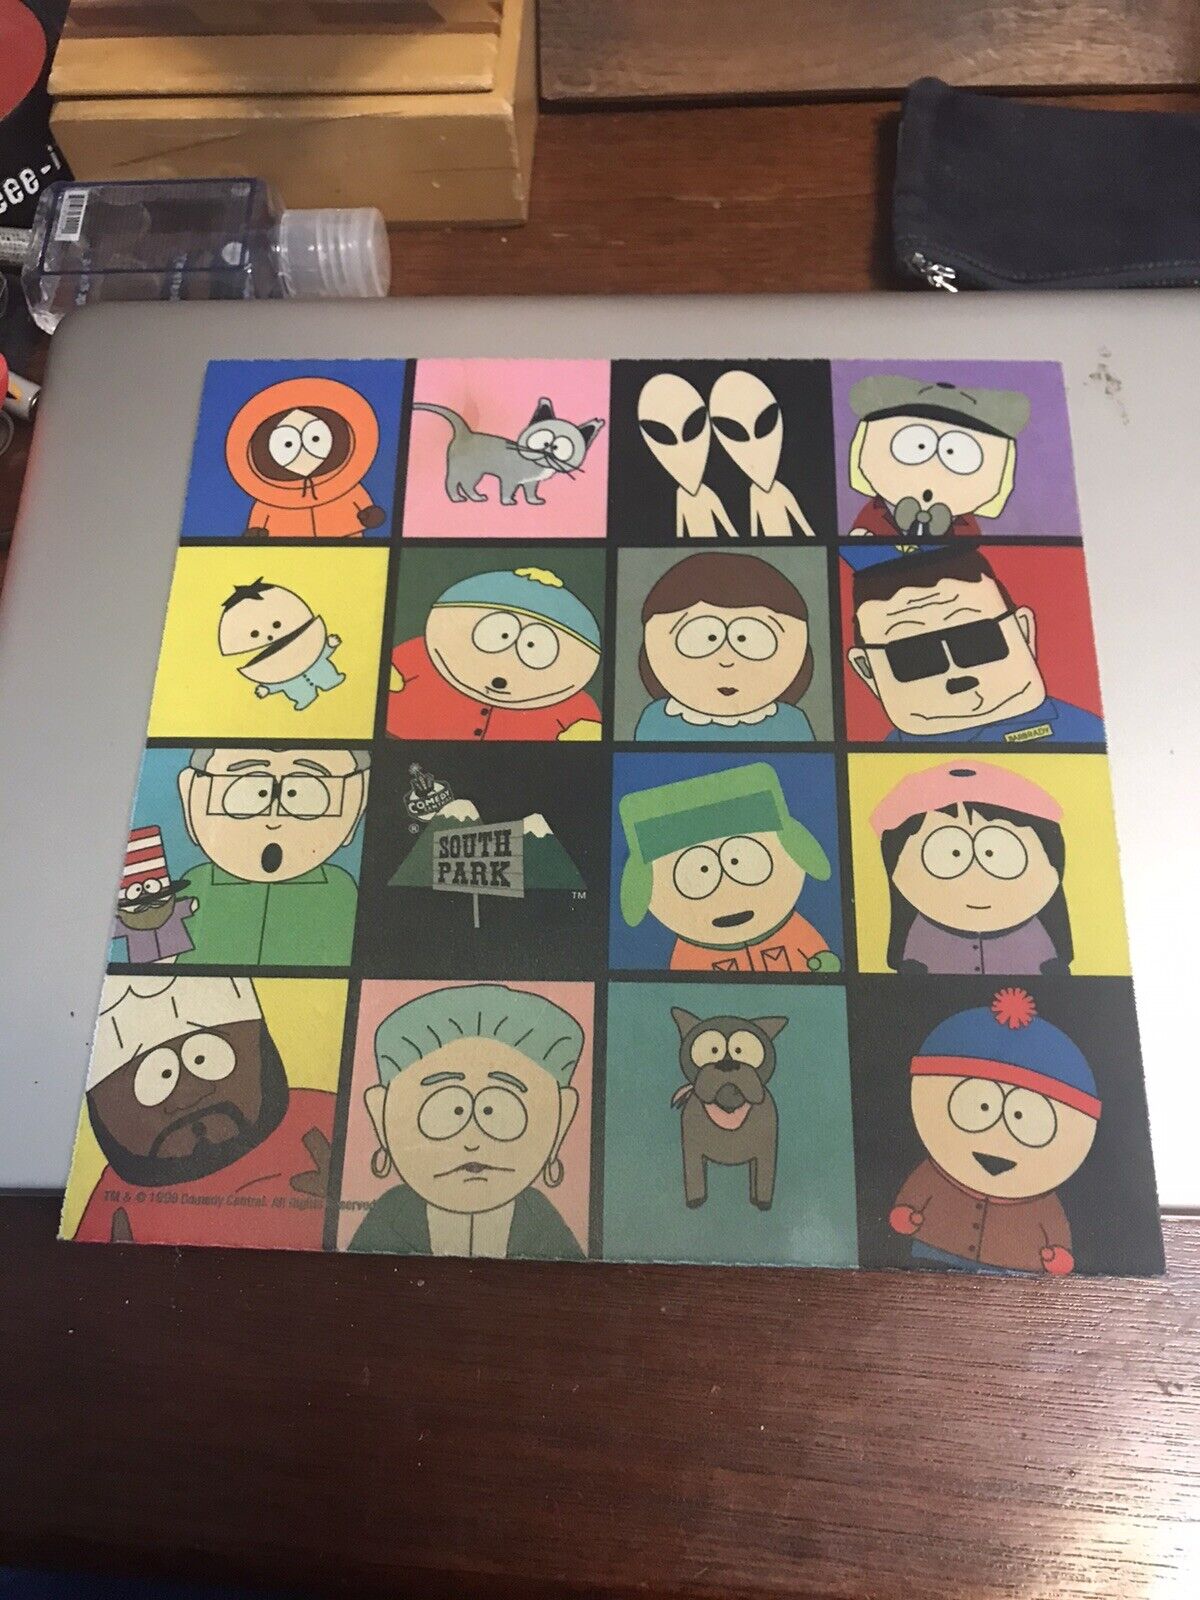 South Park Mouse Pad 1998 Comedy Central Brand. Used Condition